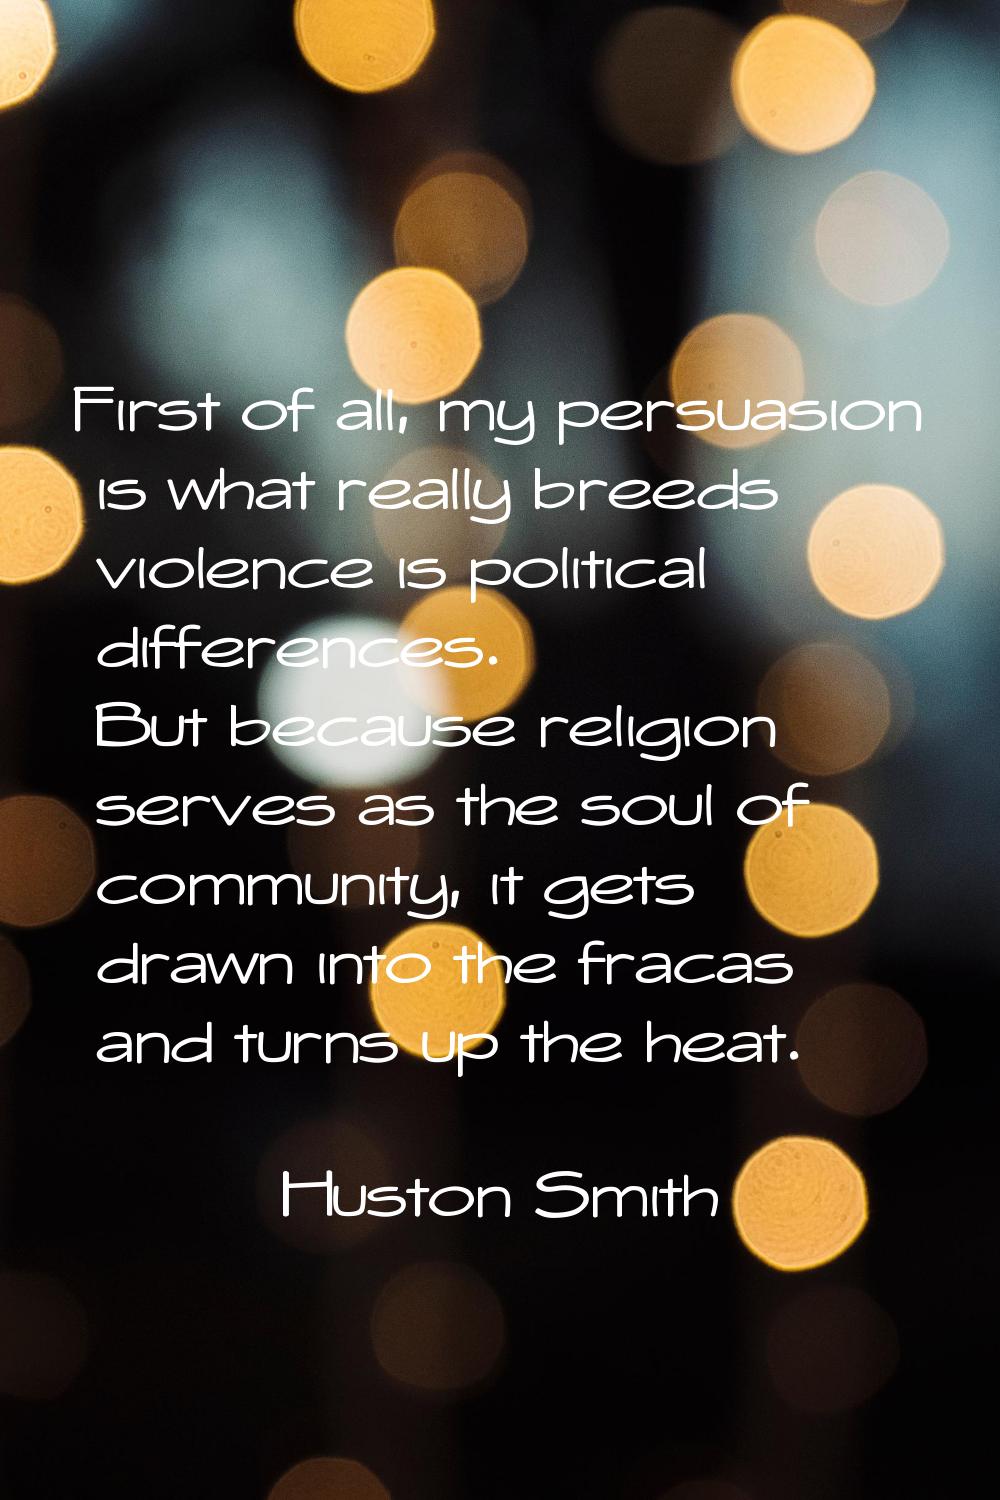 First of all, my persuasion is what really breeds violence is political differences. But because re